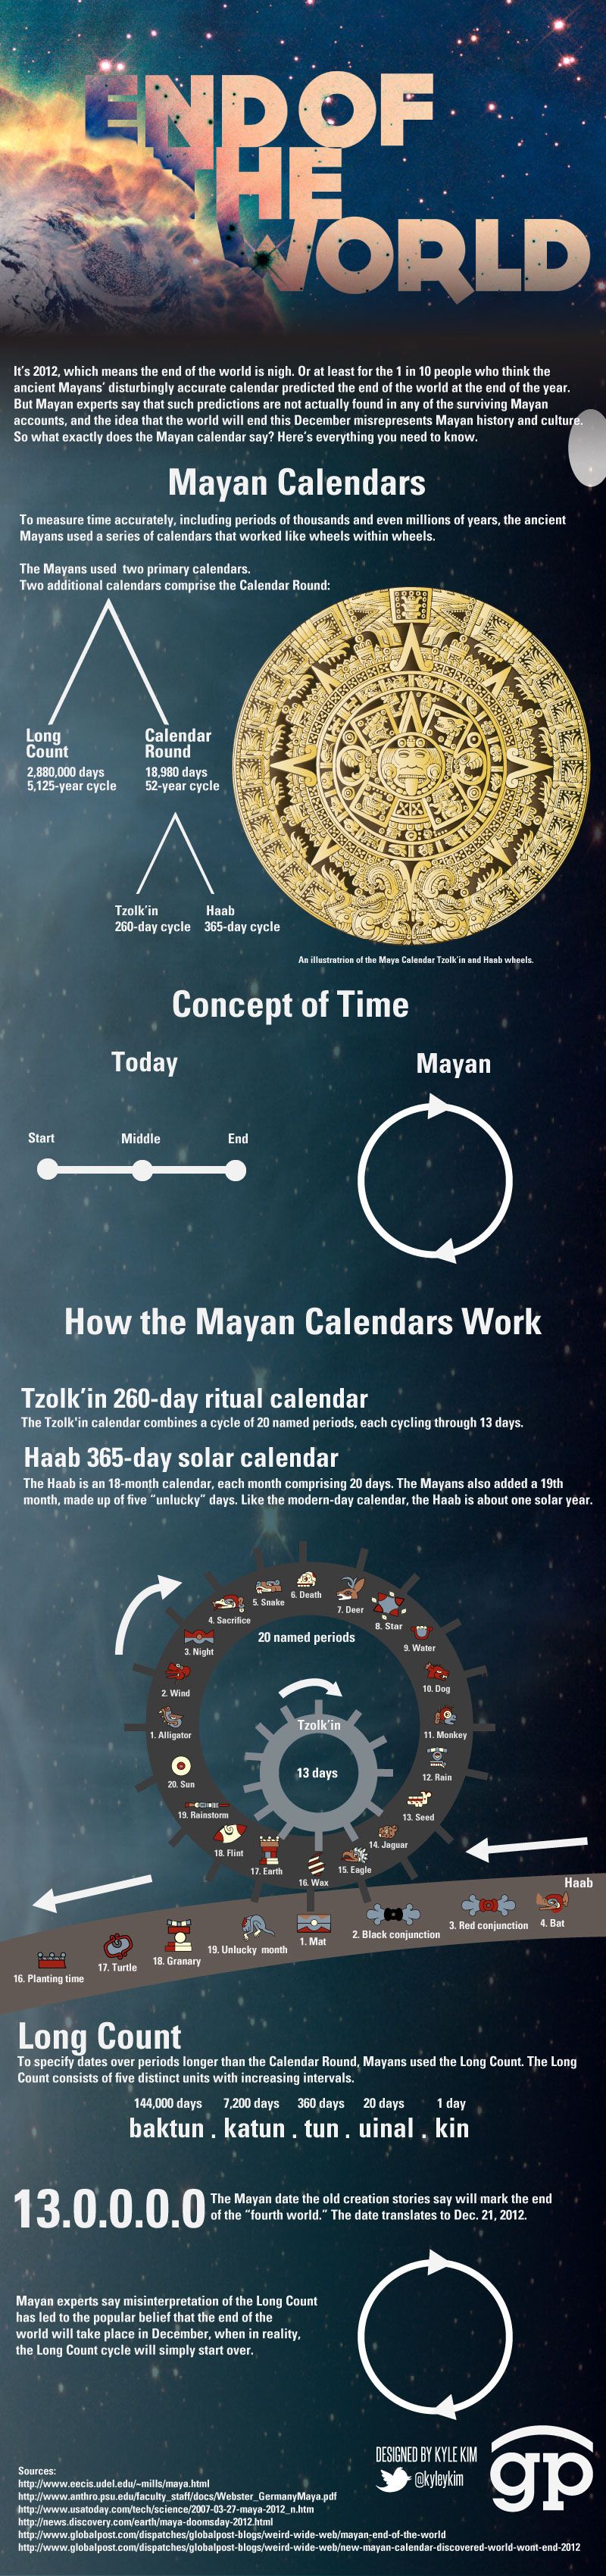 Mayan Calendars: Will December 21, 2012 be the end of the world? [INFOGRAPHIC]